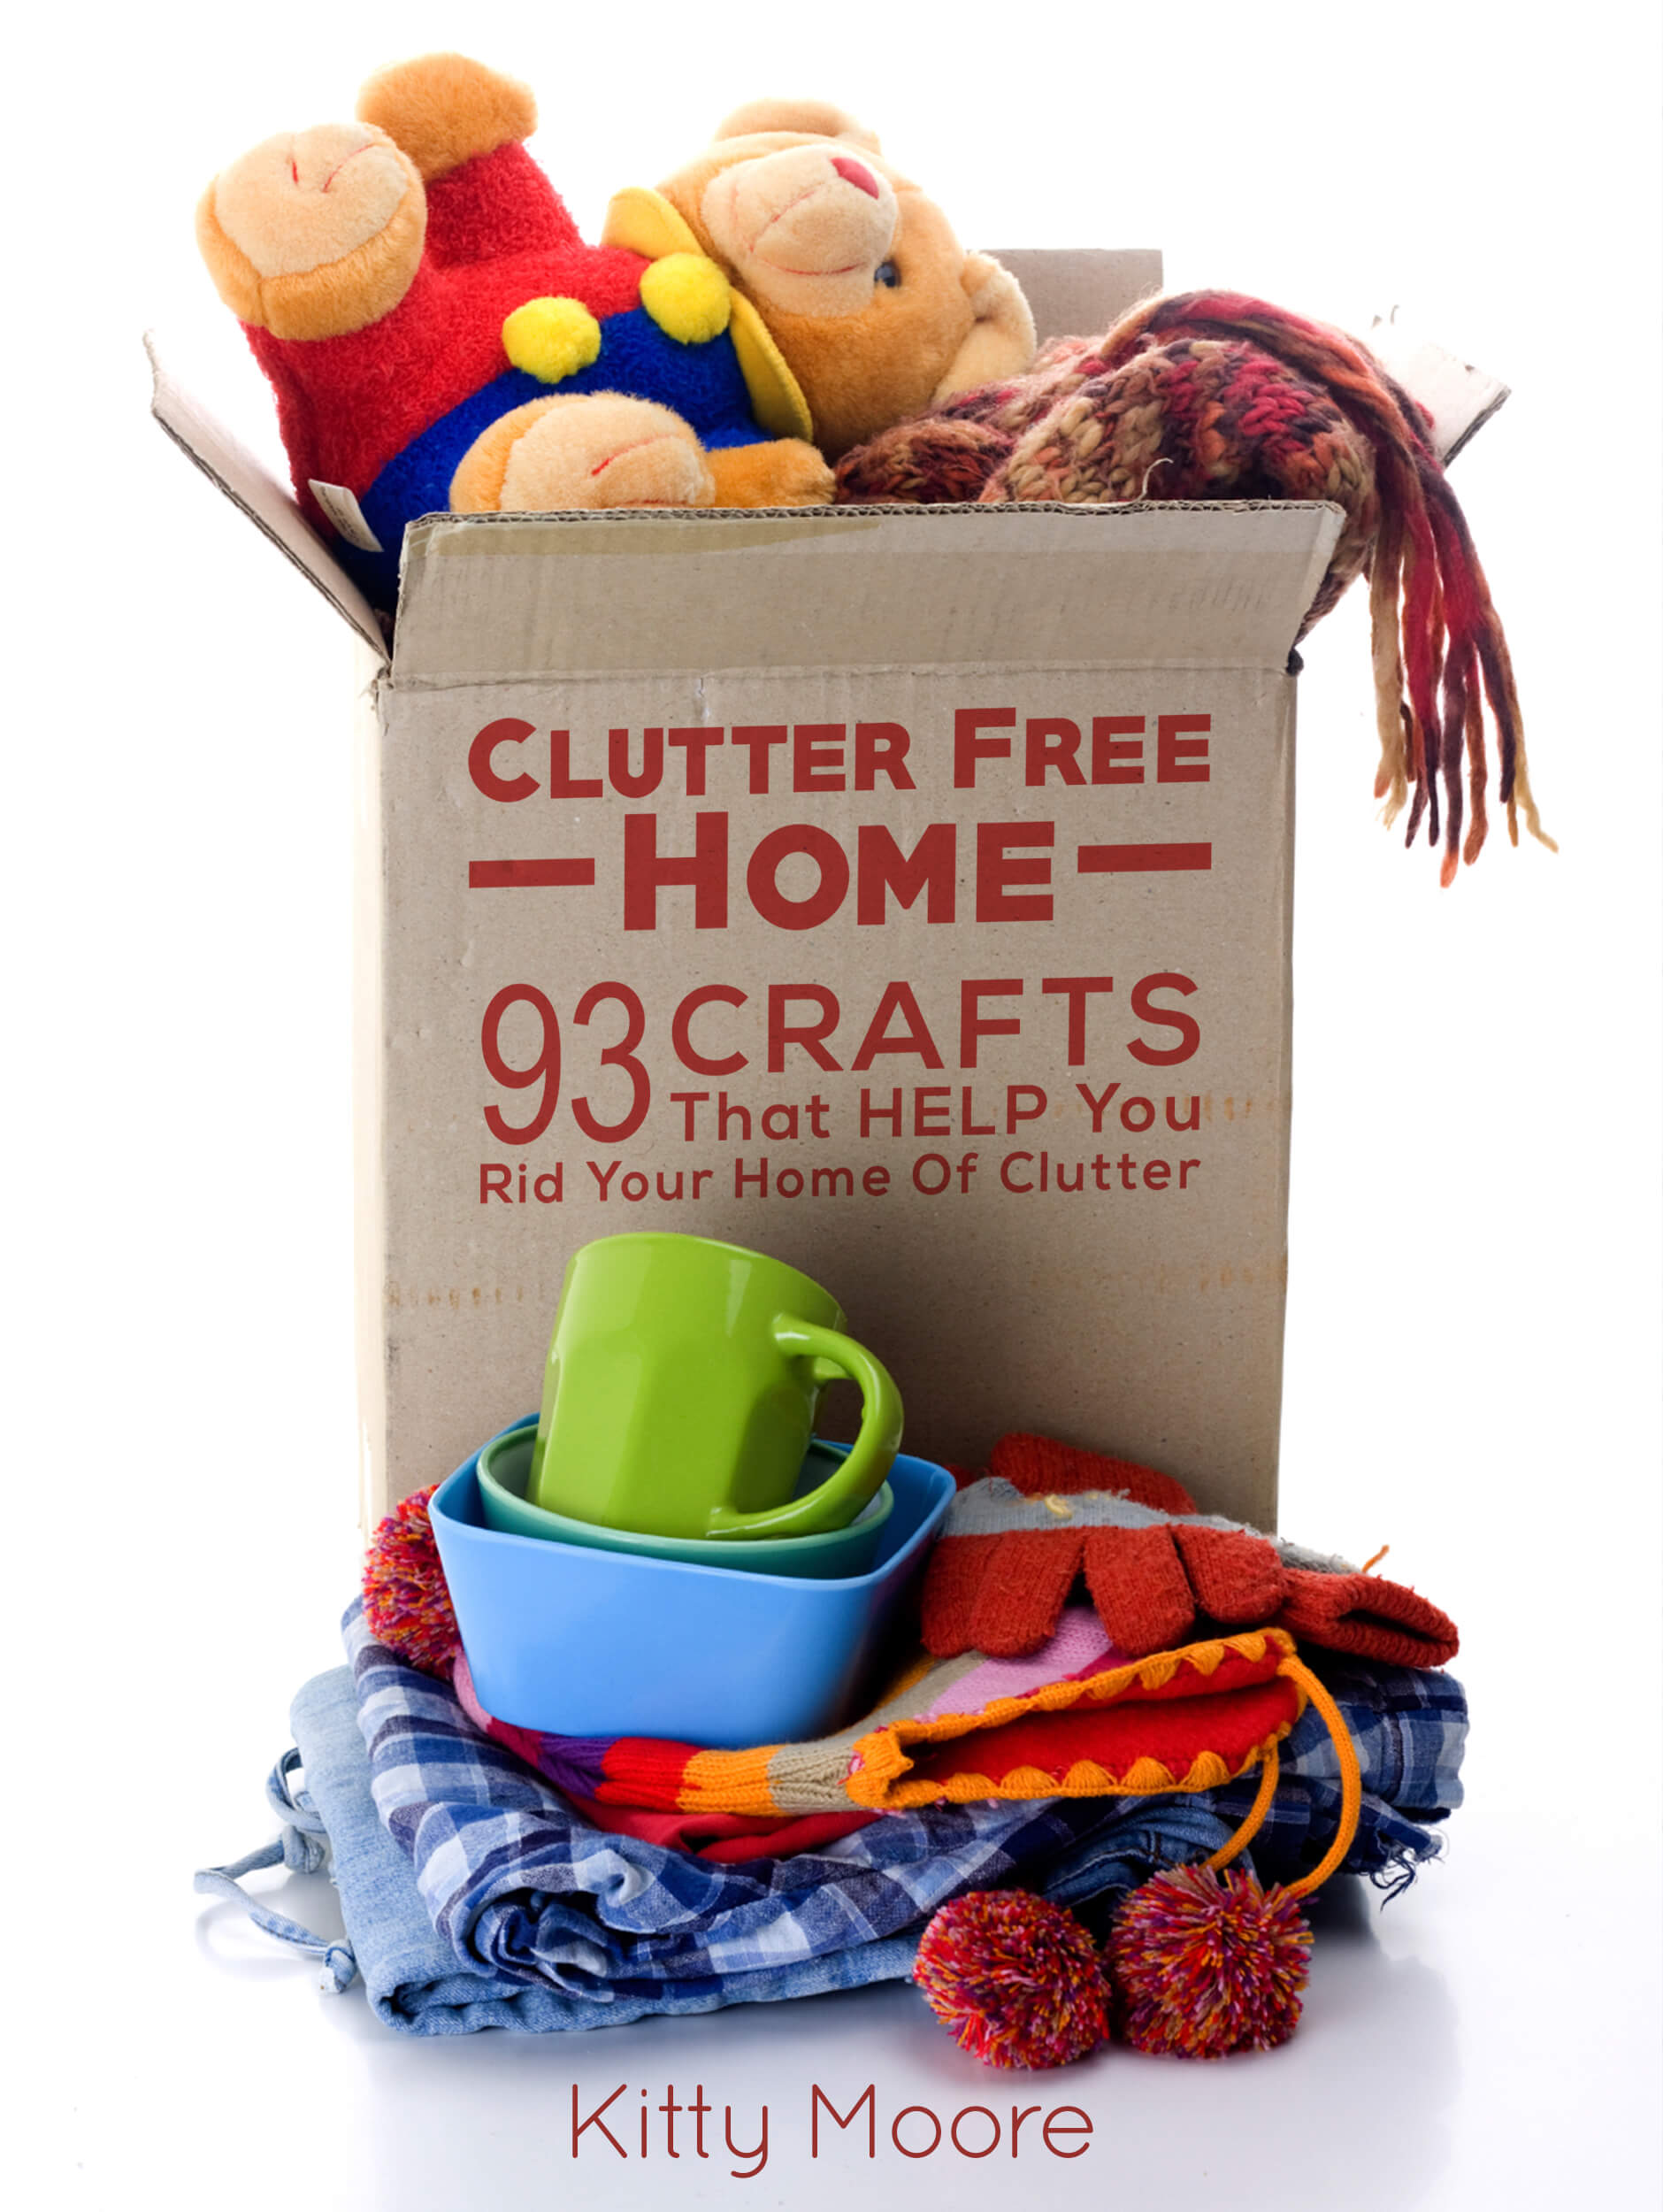 FREE: Clutter Free Home (2nd Edition): 93 Crafts That Help Rid Your Home Of Clutter! (Cleaning) by Kitty Moore